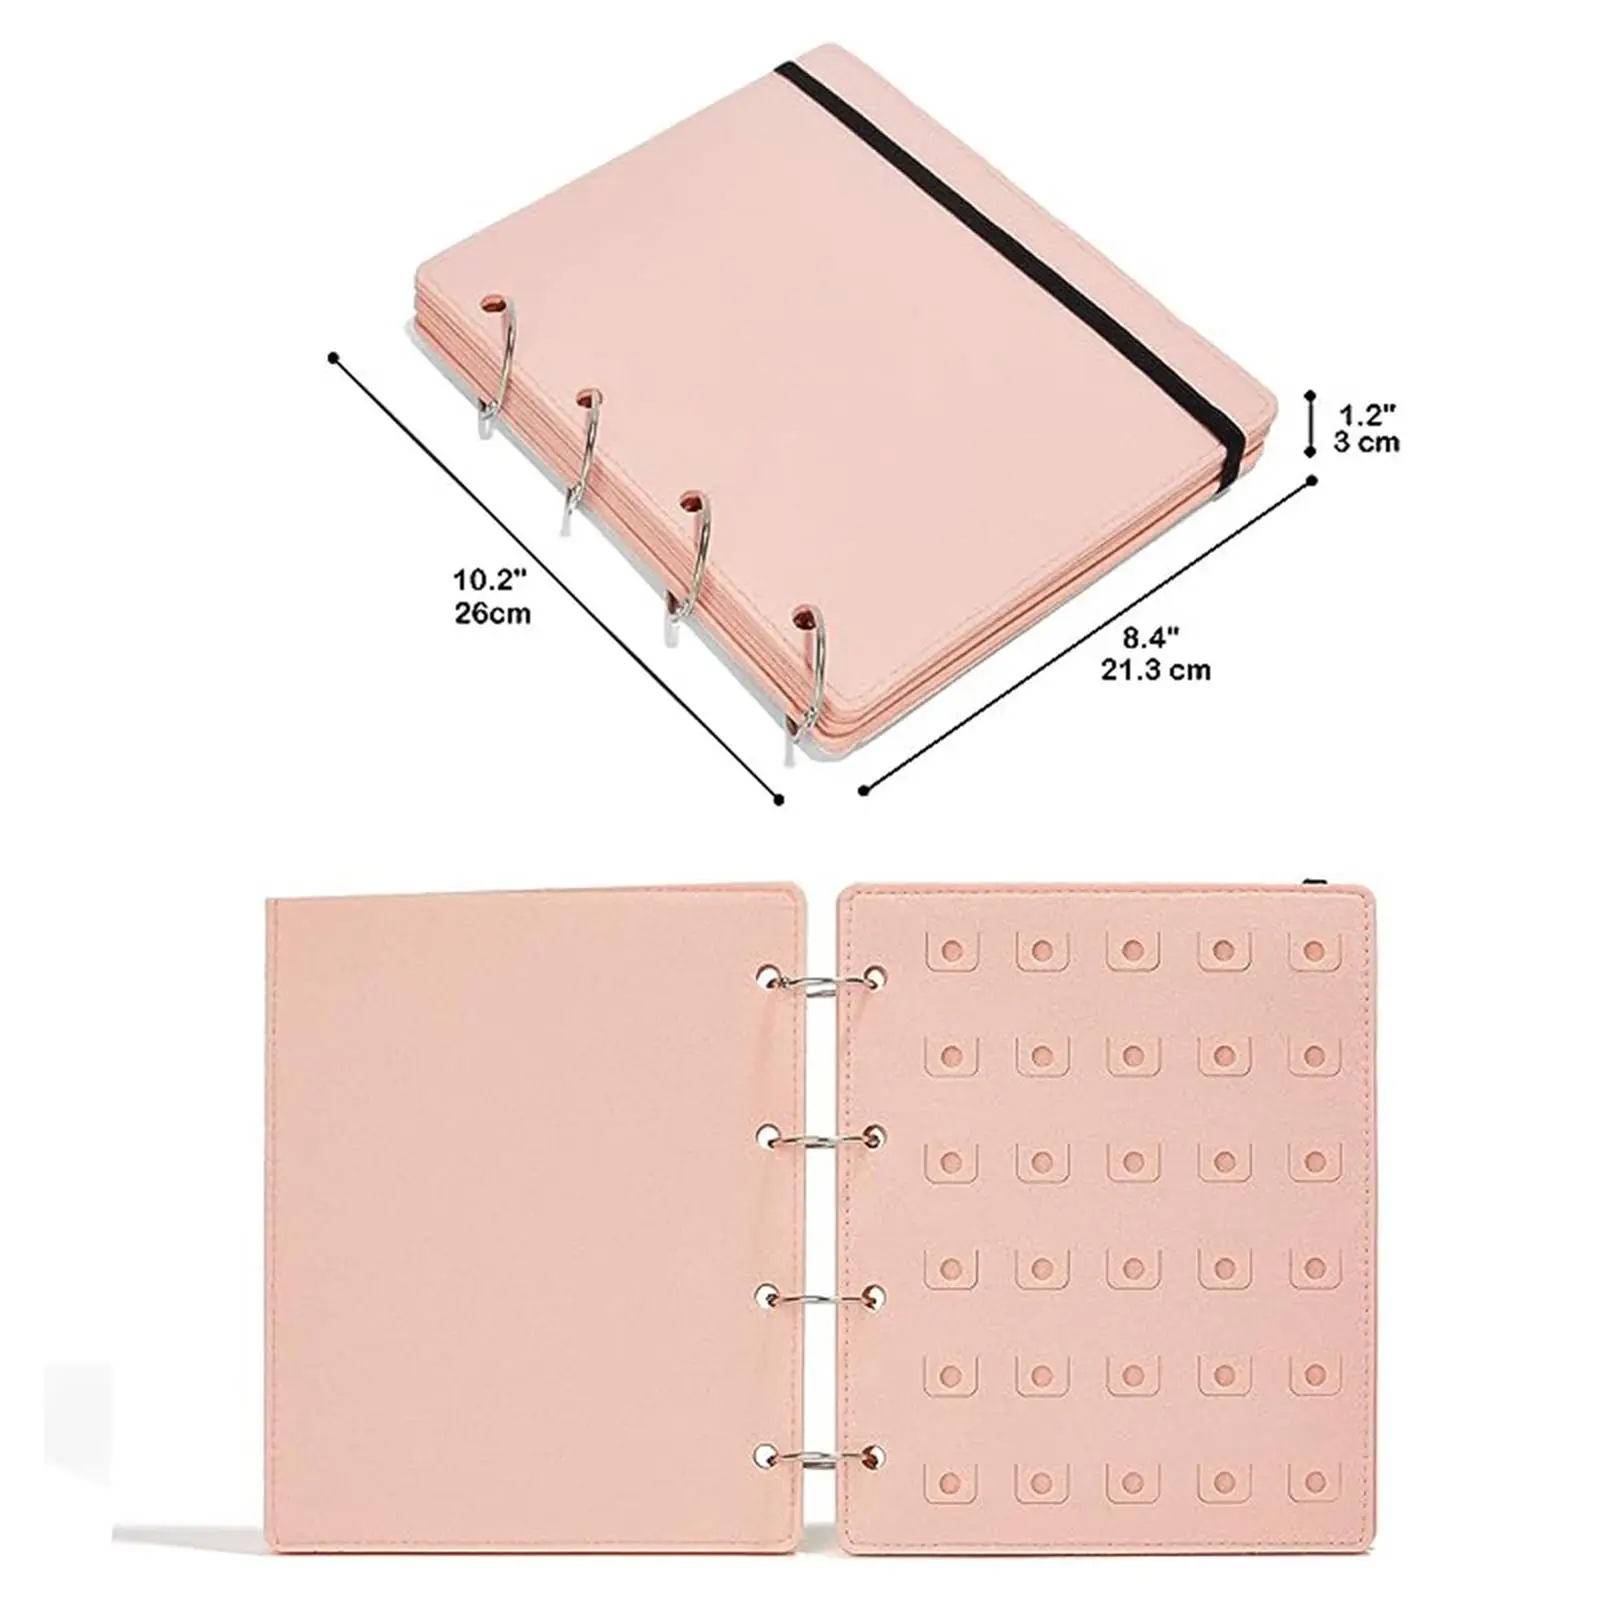 Portable Earrings Travel Album Stud Earring Organizer Jewelry Storage Case for Business Trips Travel Women Parties